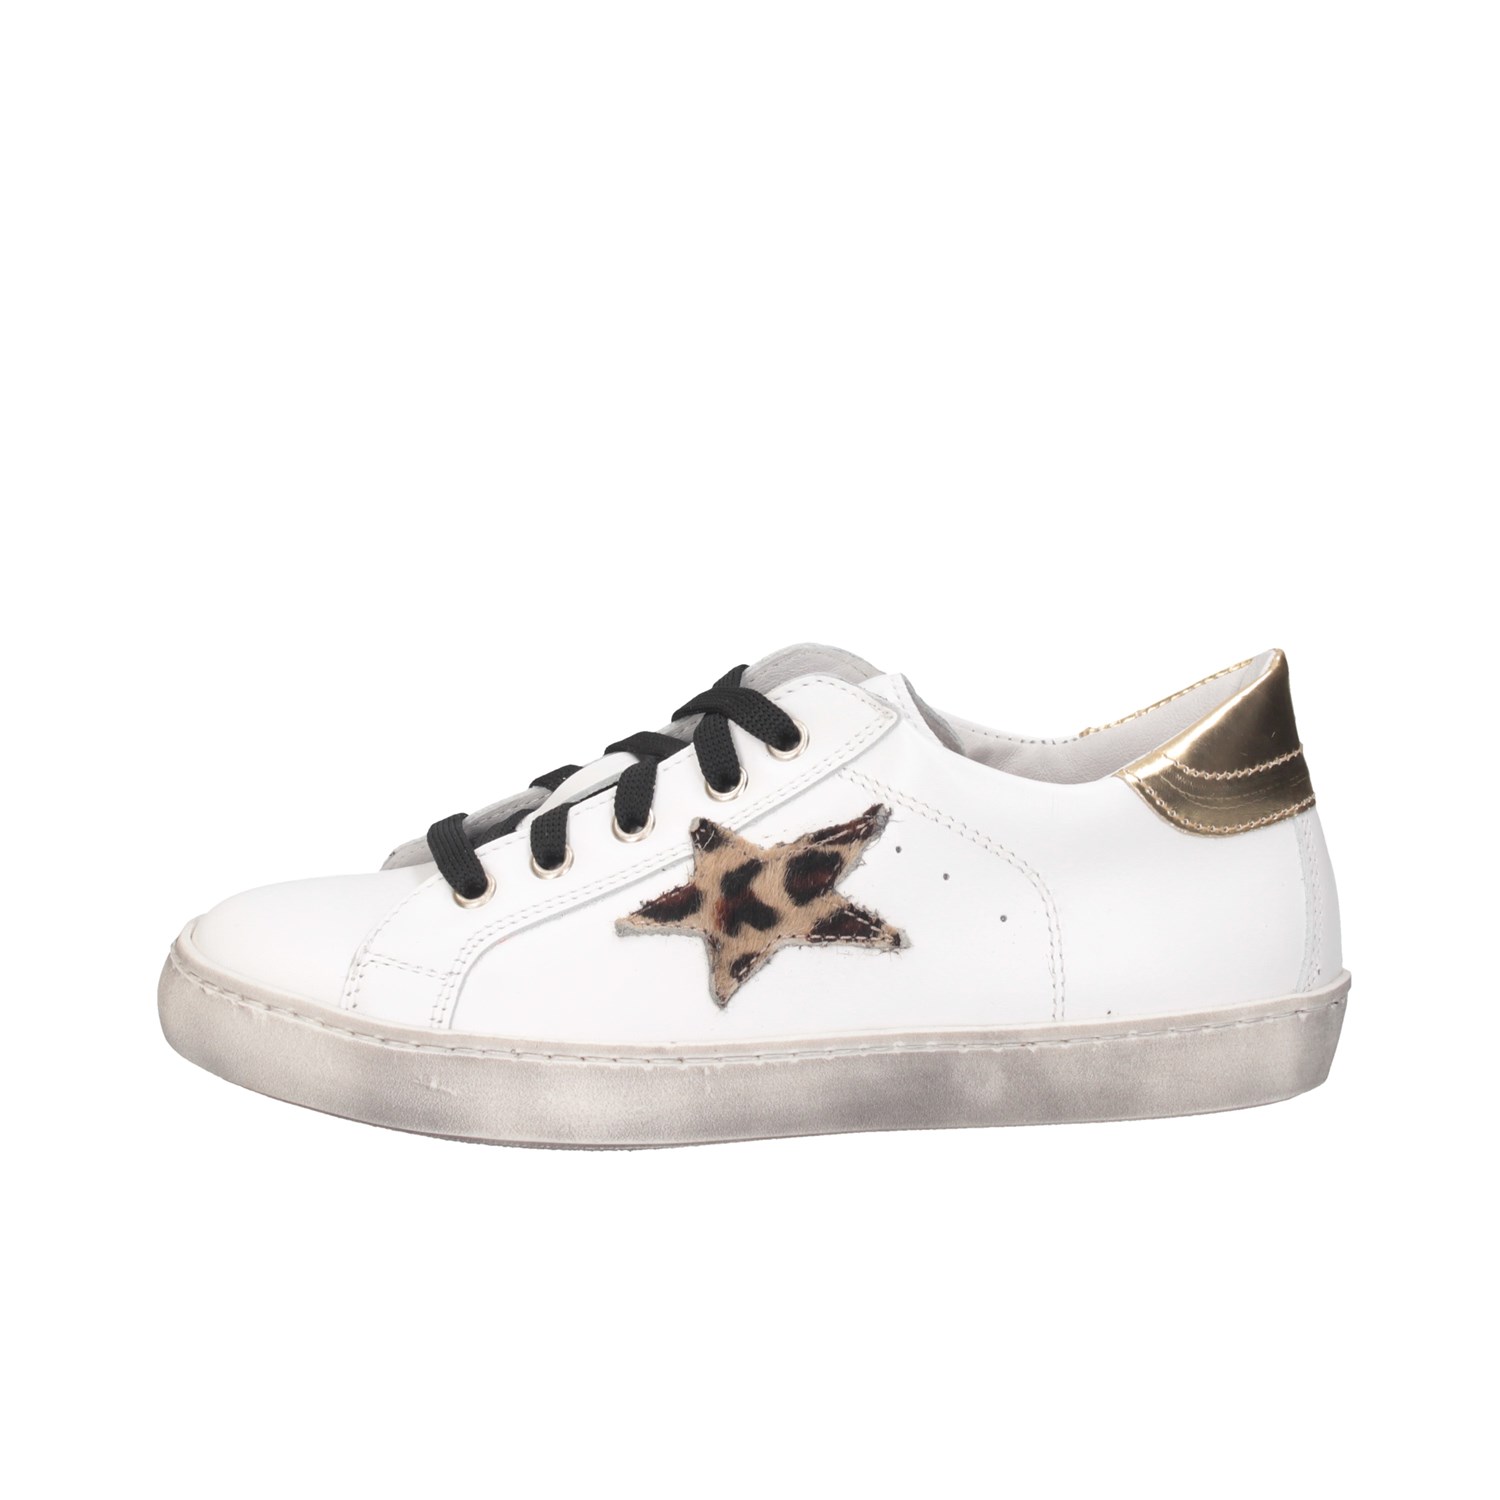 Dianetti Made In Italy I9869 White / Gold Shoes Child 